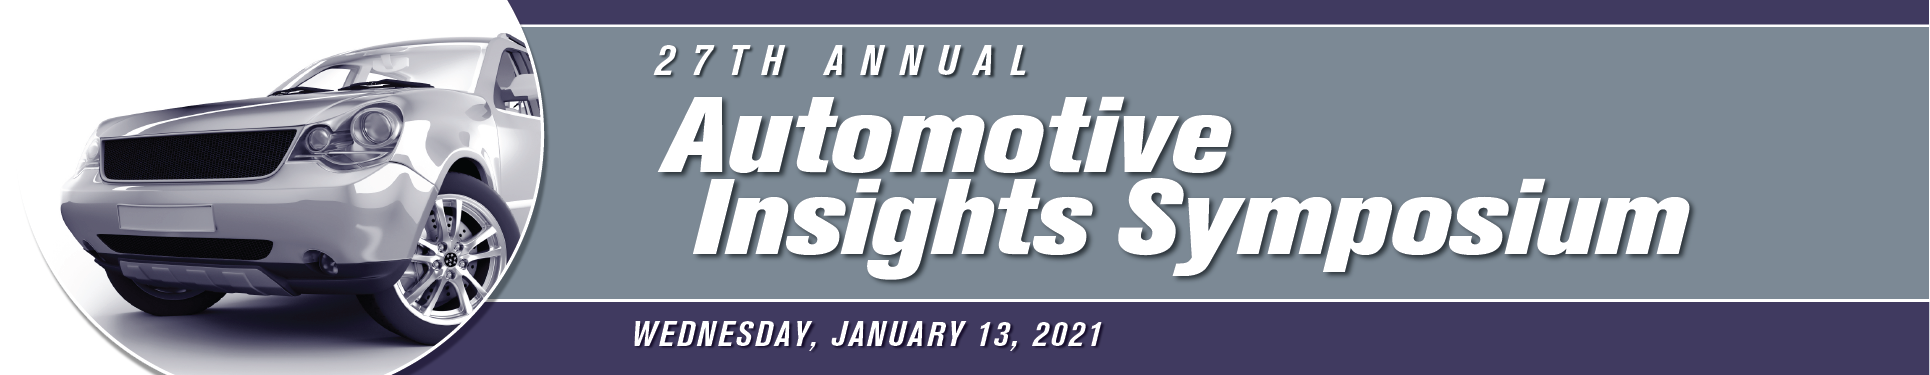 Banner image for the 2021 Automotive Insights Symposium